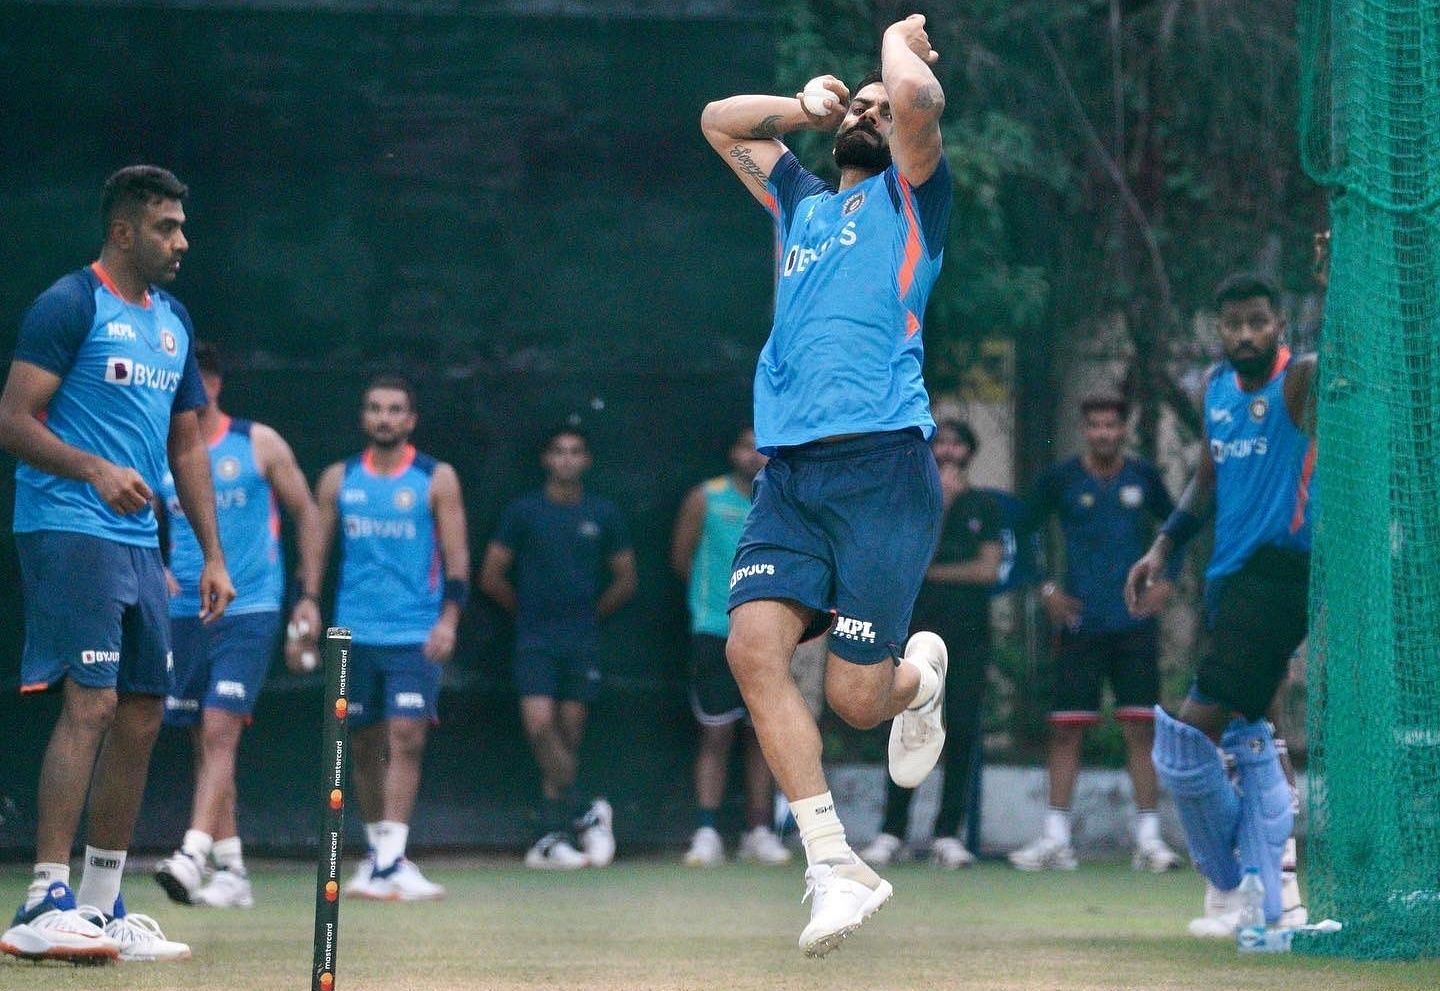 The former India captain bowls in the nets.